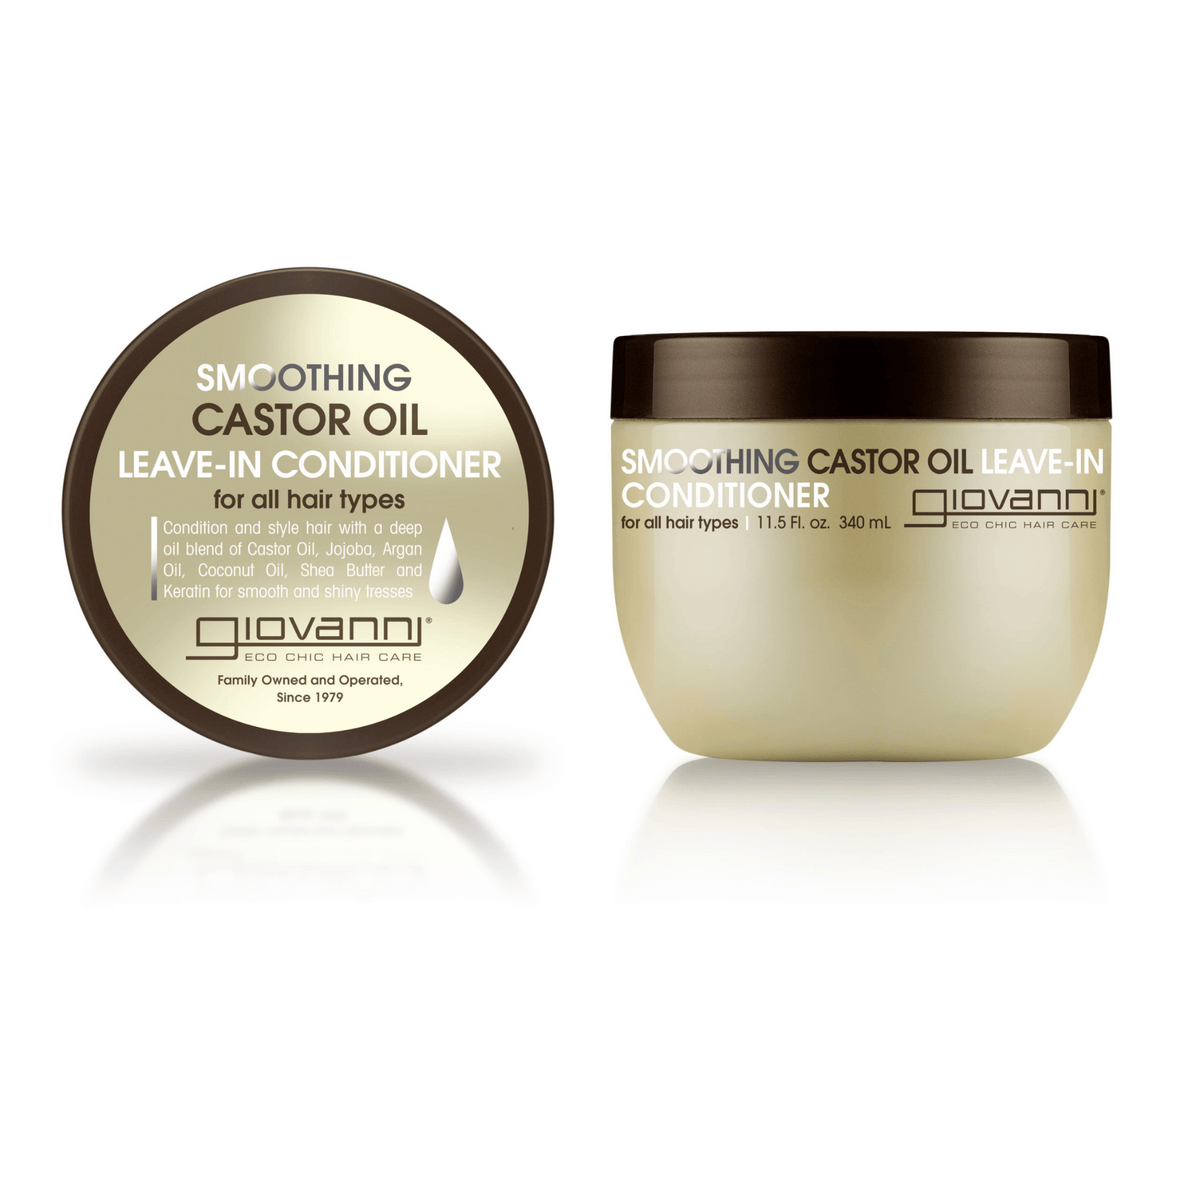 Primary Image of Castor Oil Leave-In Conditioner